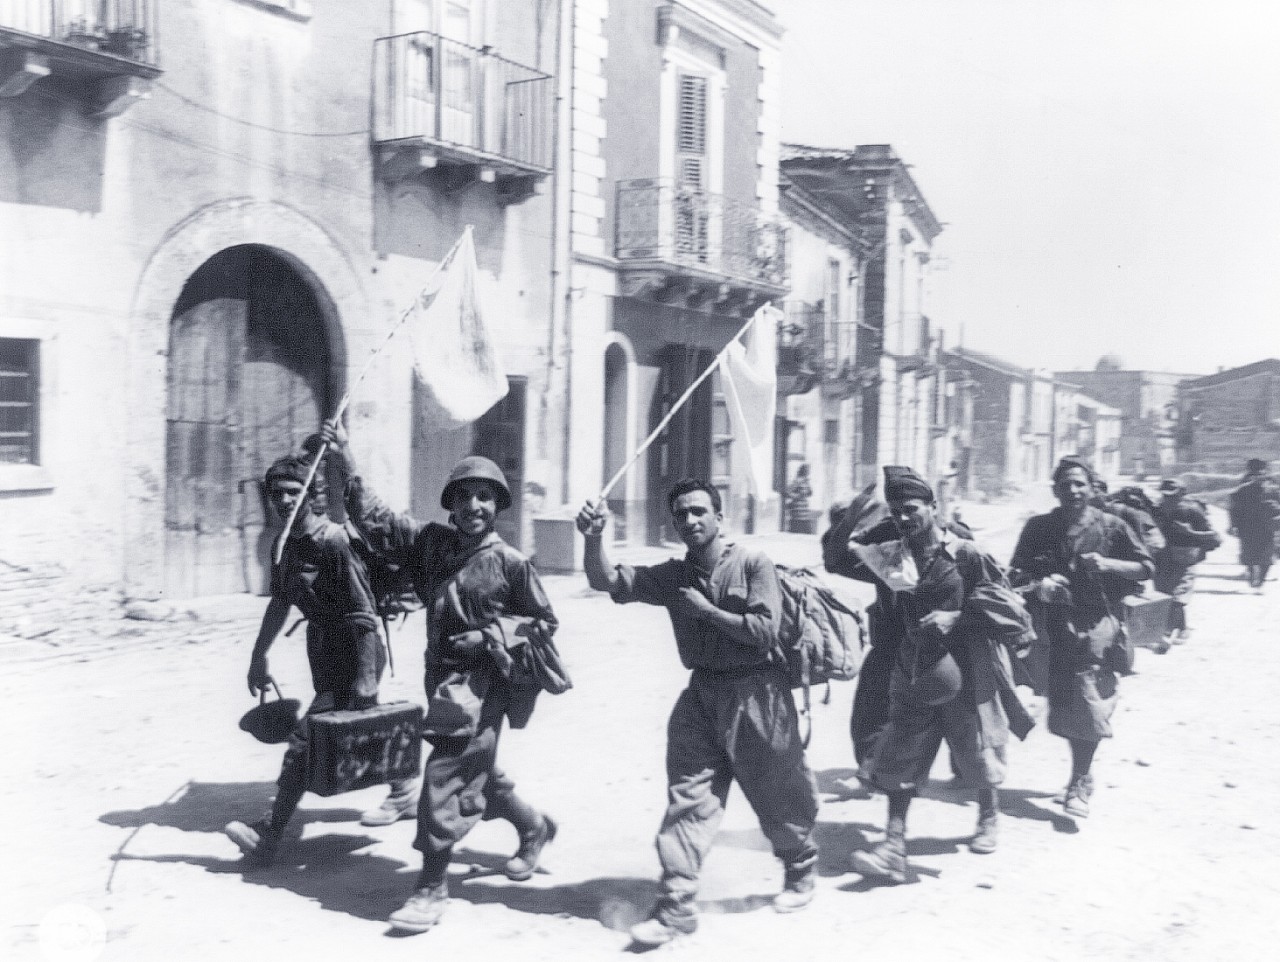 LC-USZ62-98976:   Operation Husky, July-August 1943.  Group of smiling Italian prisoners, trudging into a small town near Messina, Sicily, behind hastily rigged flags of surrender.   U.S. Army Photograph.  Courtesy of the Library of Congress.  (2015/11/13).